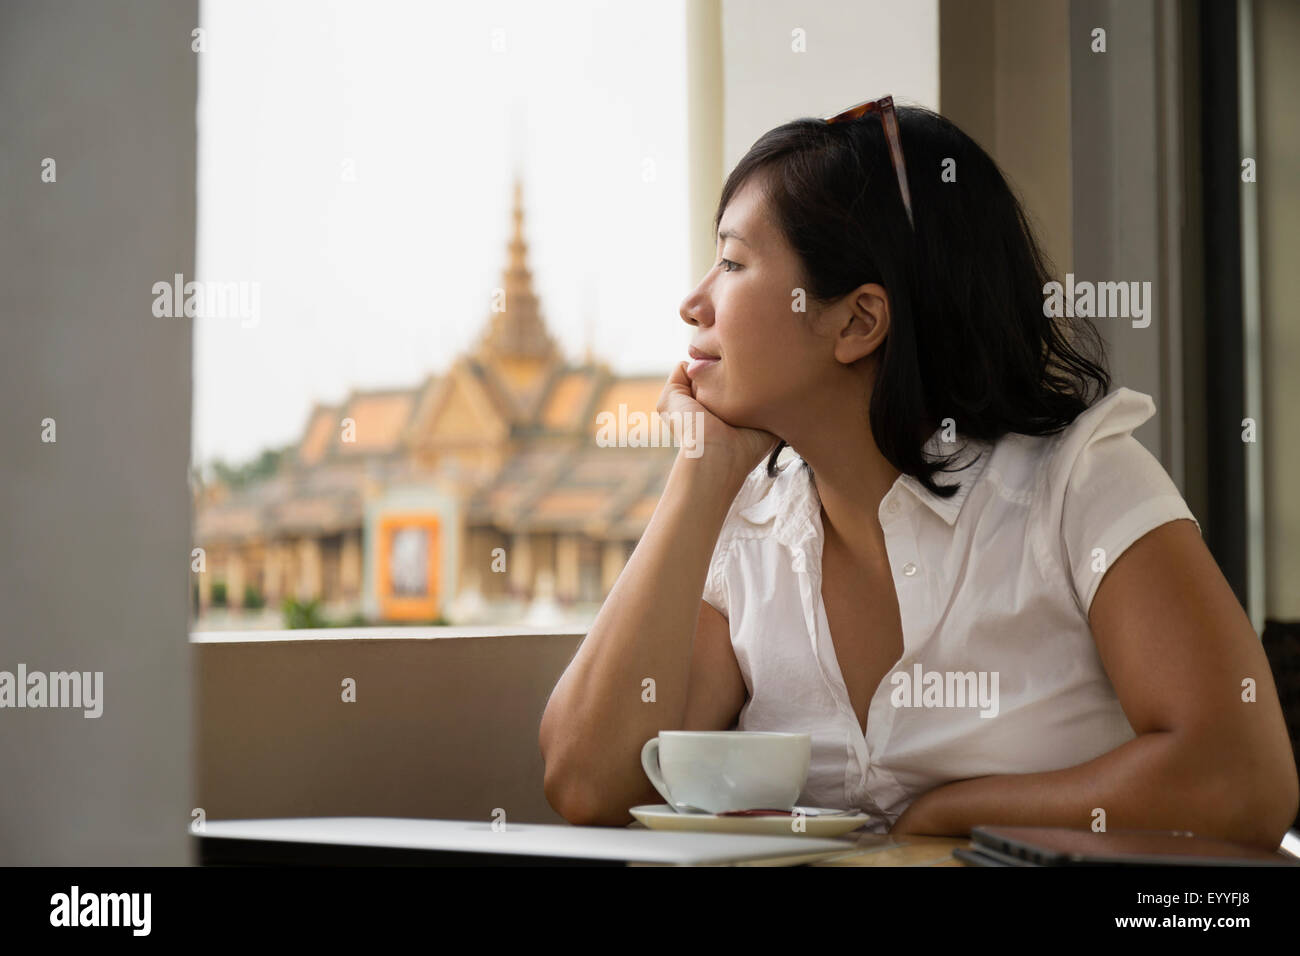 Asian woman looking out cafe window, Phnom Penh, Cambodia Stock Photo